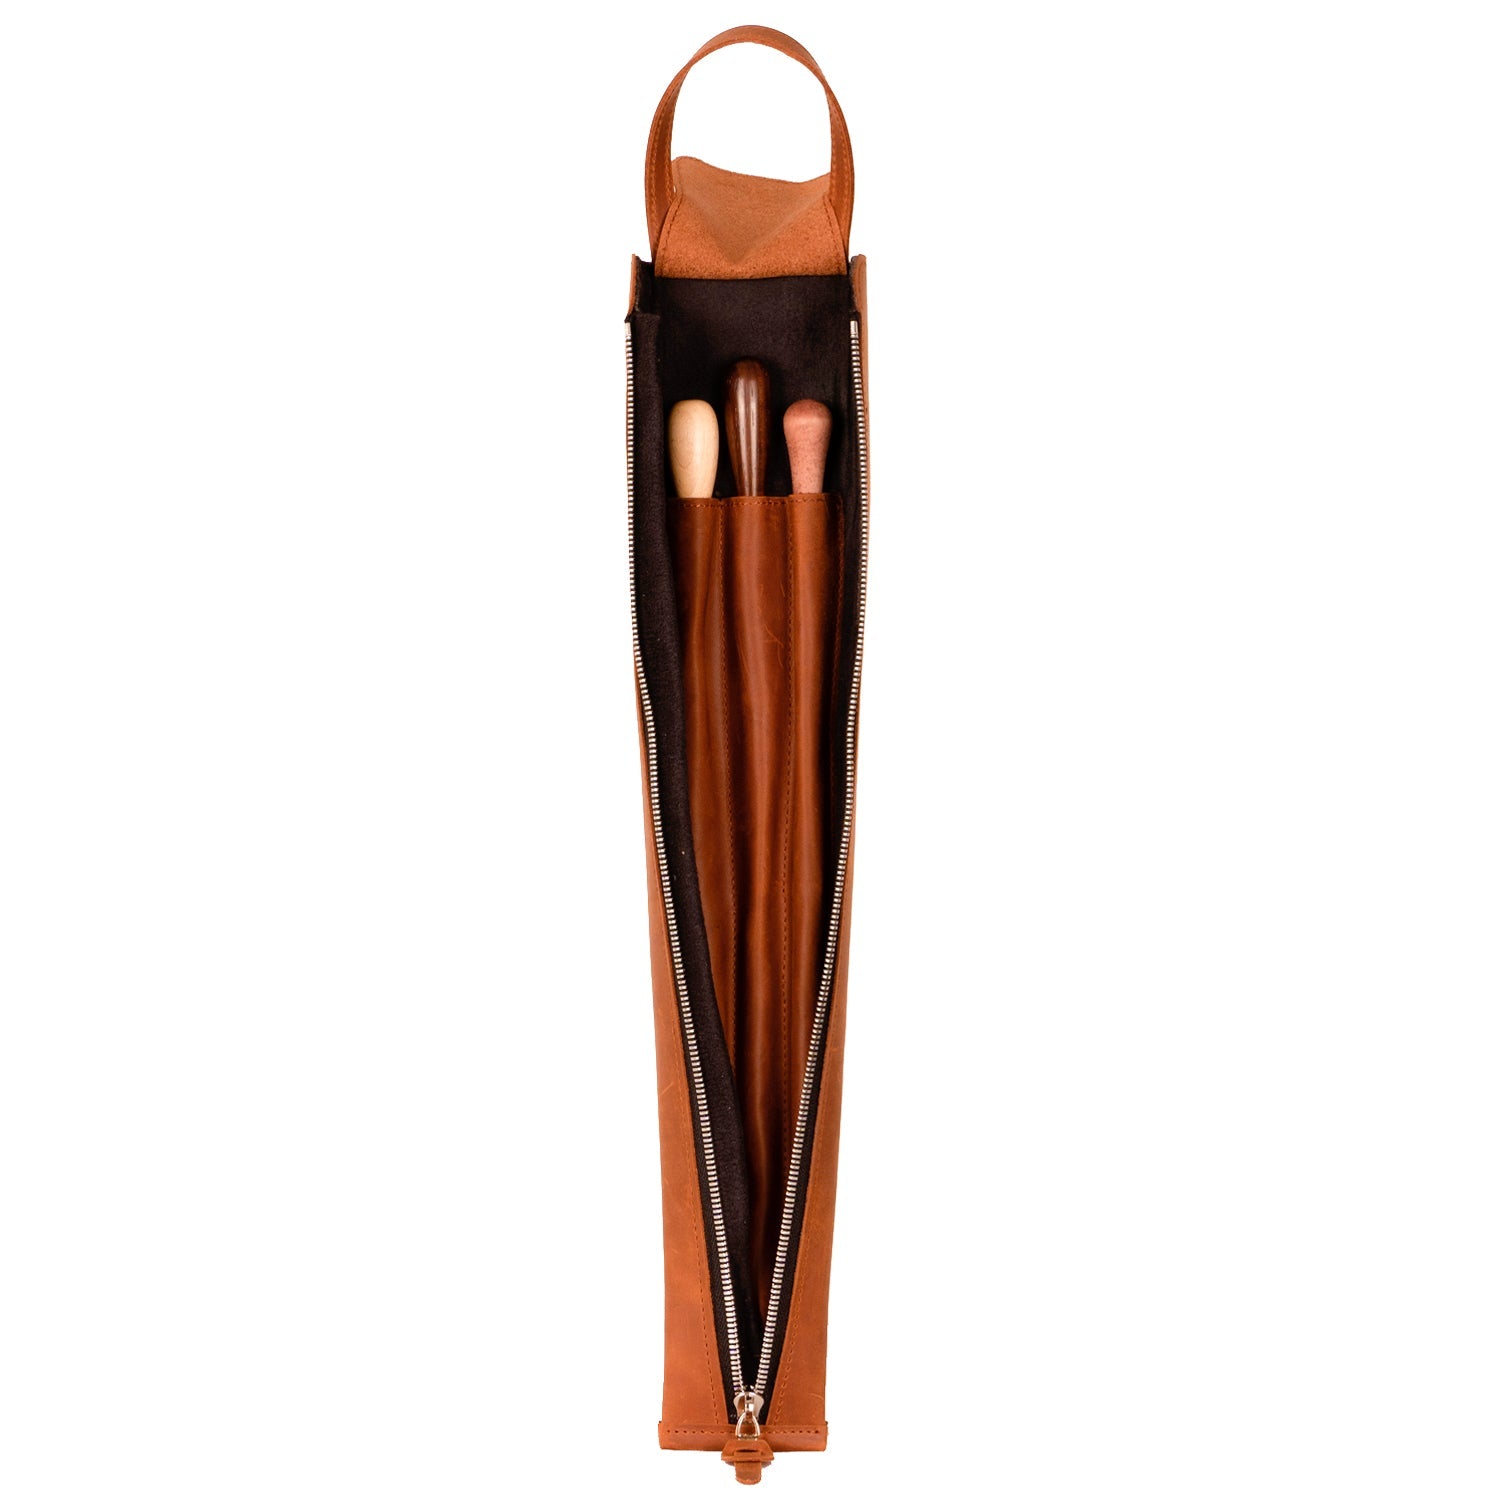 Conductor's Baton Case Crazy Horse Leather